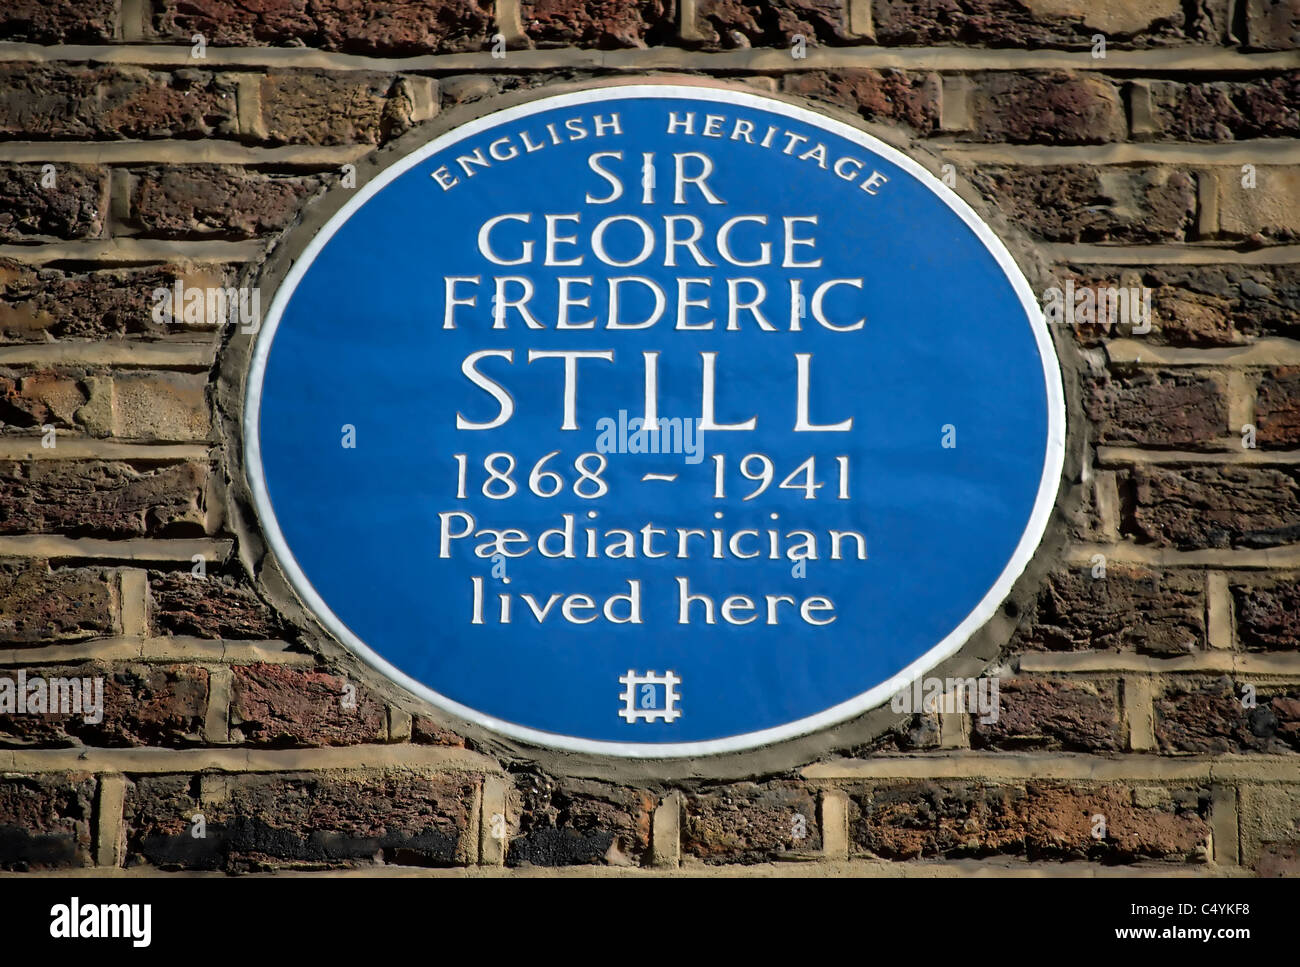 english heritage blue plaque marking a home of paediatrician sir george frederic still, marylebone, london, england Stock Photo